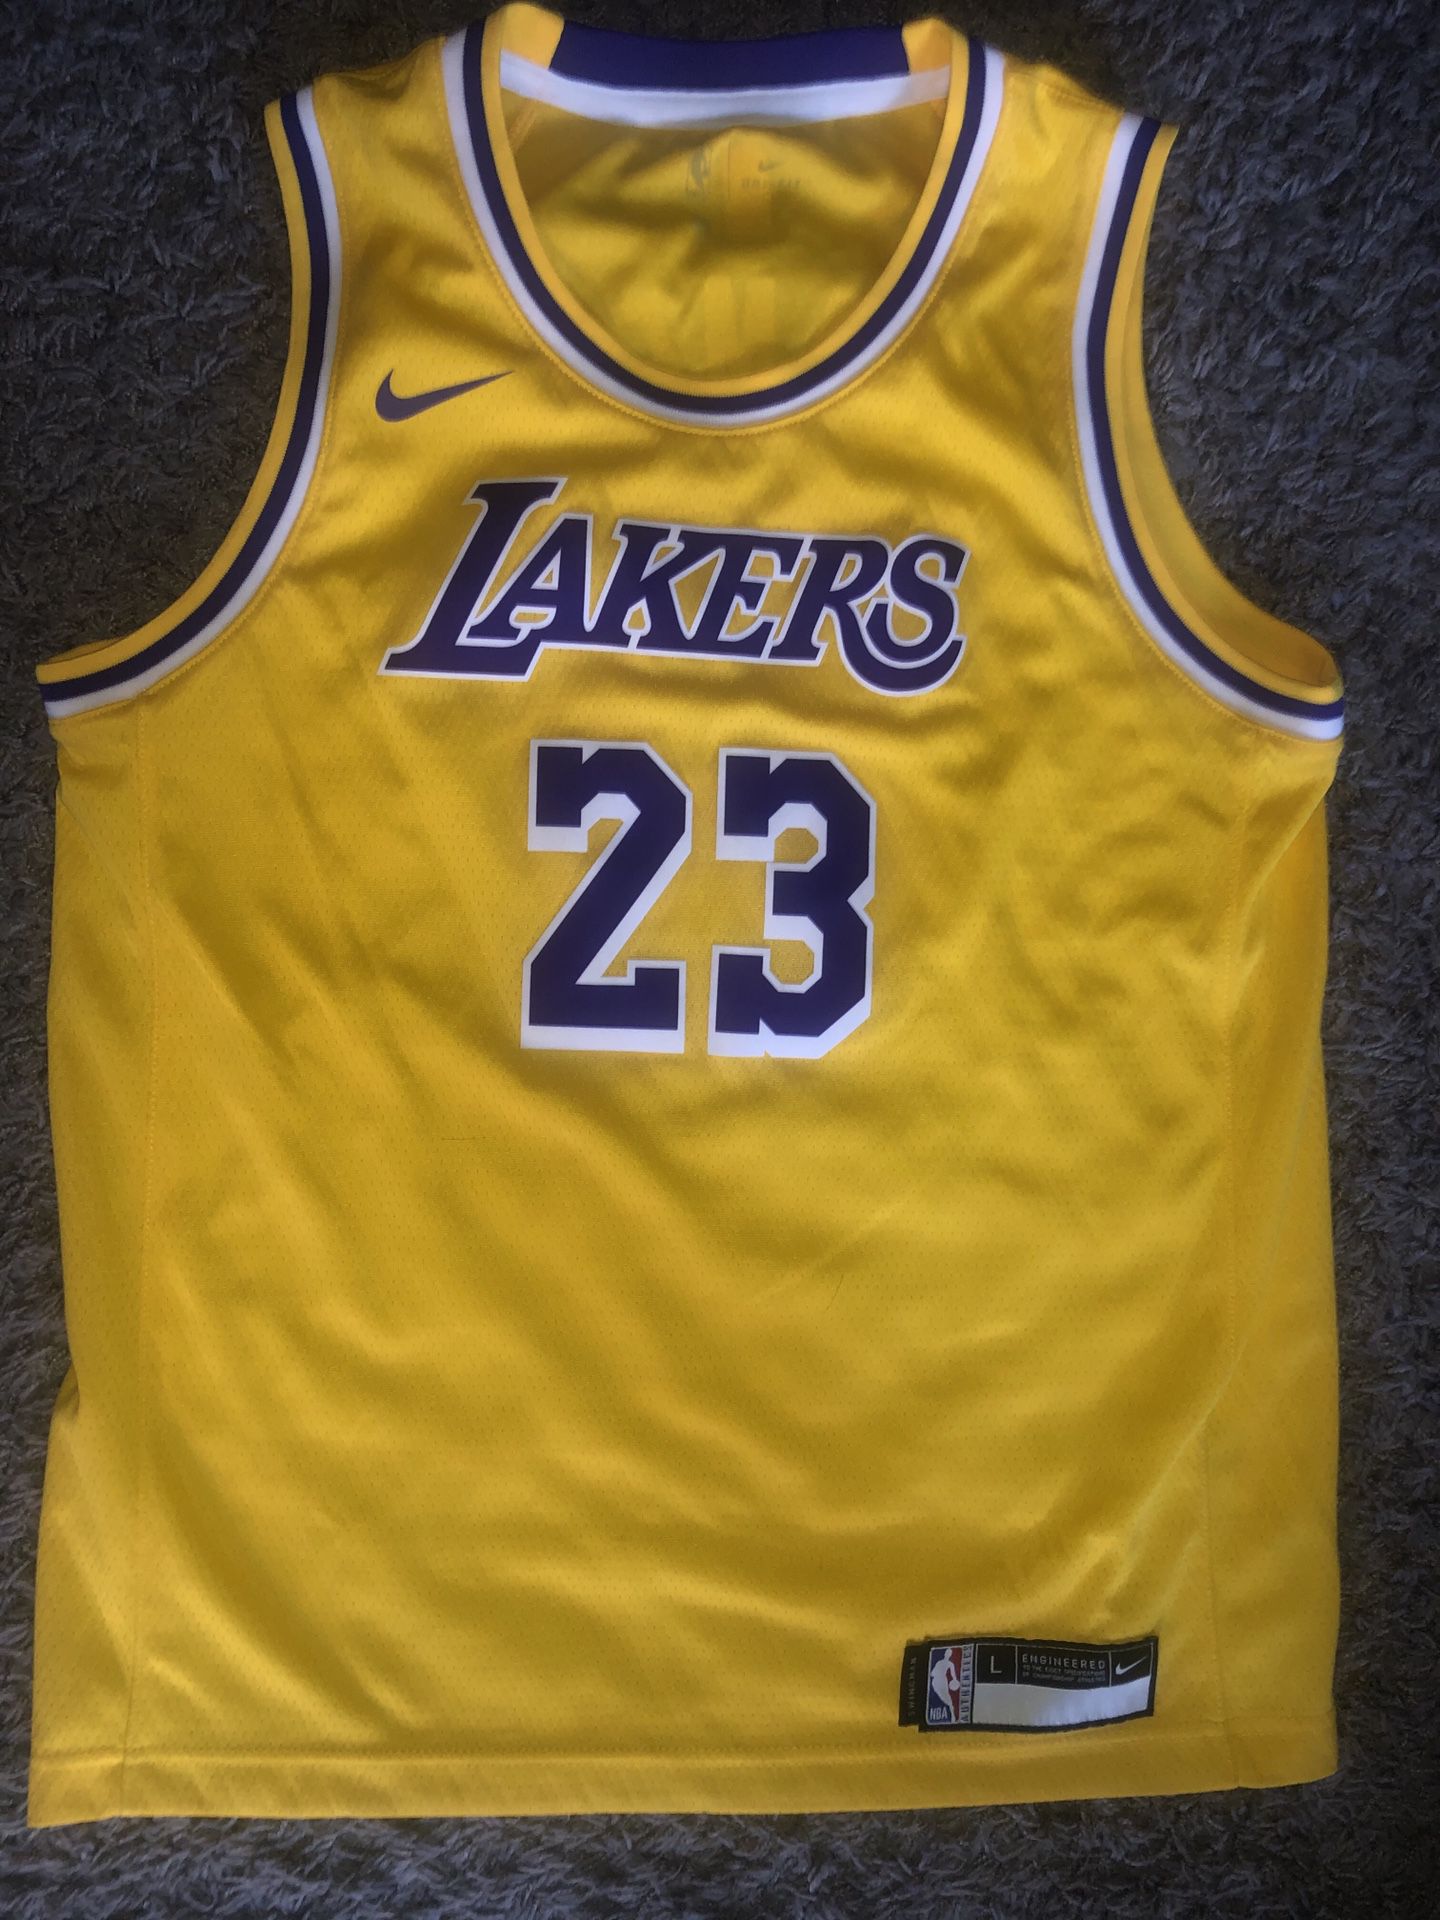 Lebron James  23 Los Angeles Lakers Women’s Large Jersey  Brand New (No Tags)